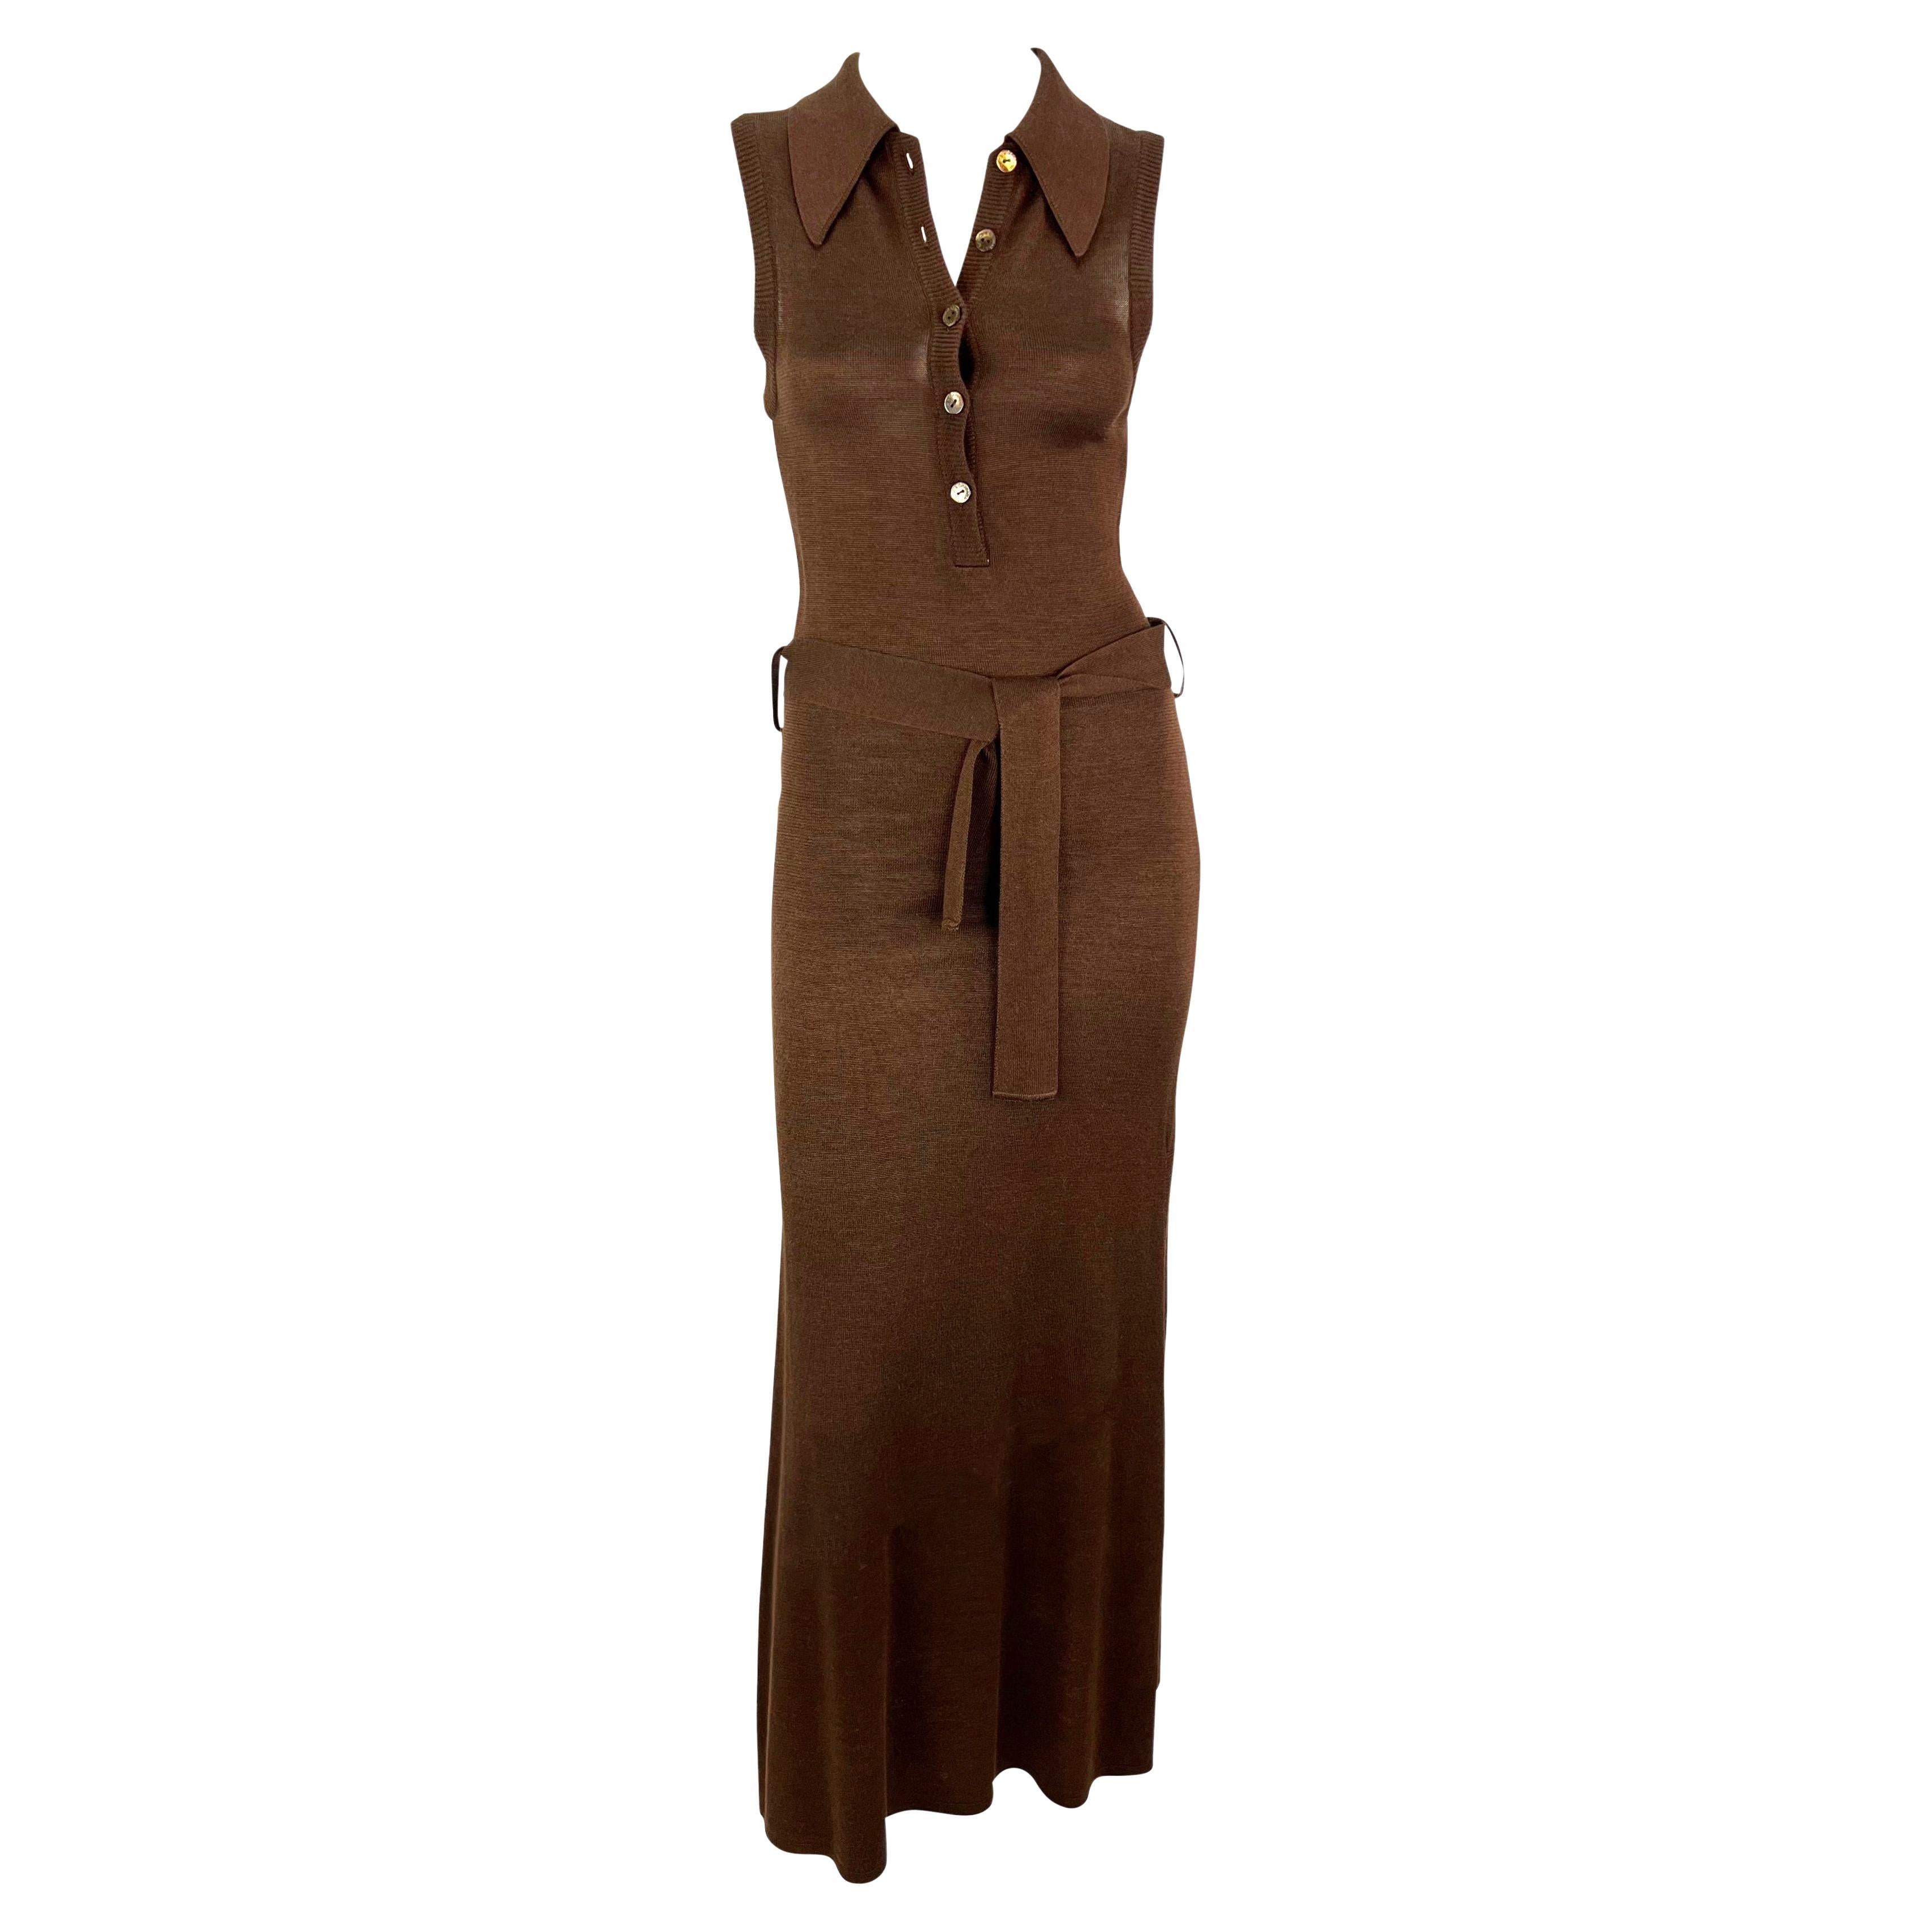 S/S 1996 Dolce & Gabbana Runway Brown Knit Bodycon Belted Maxi Collared Dress For Sale